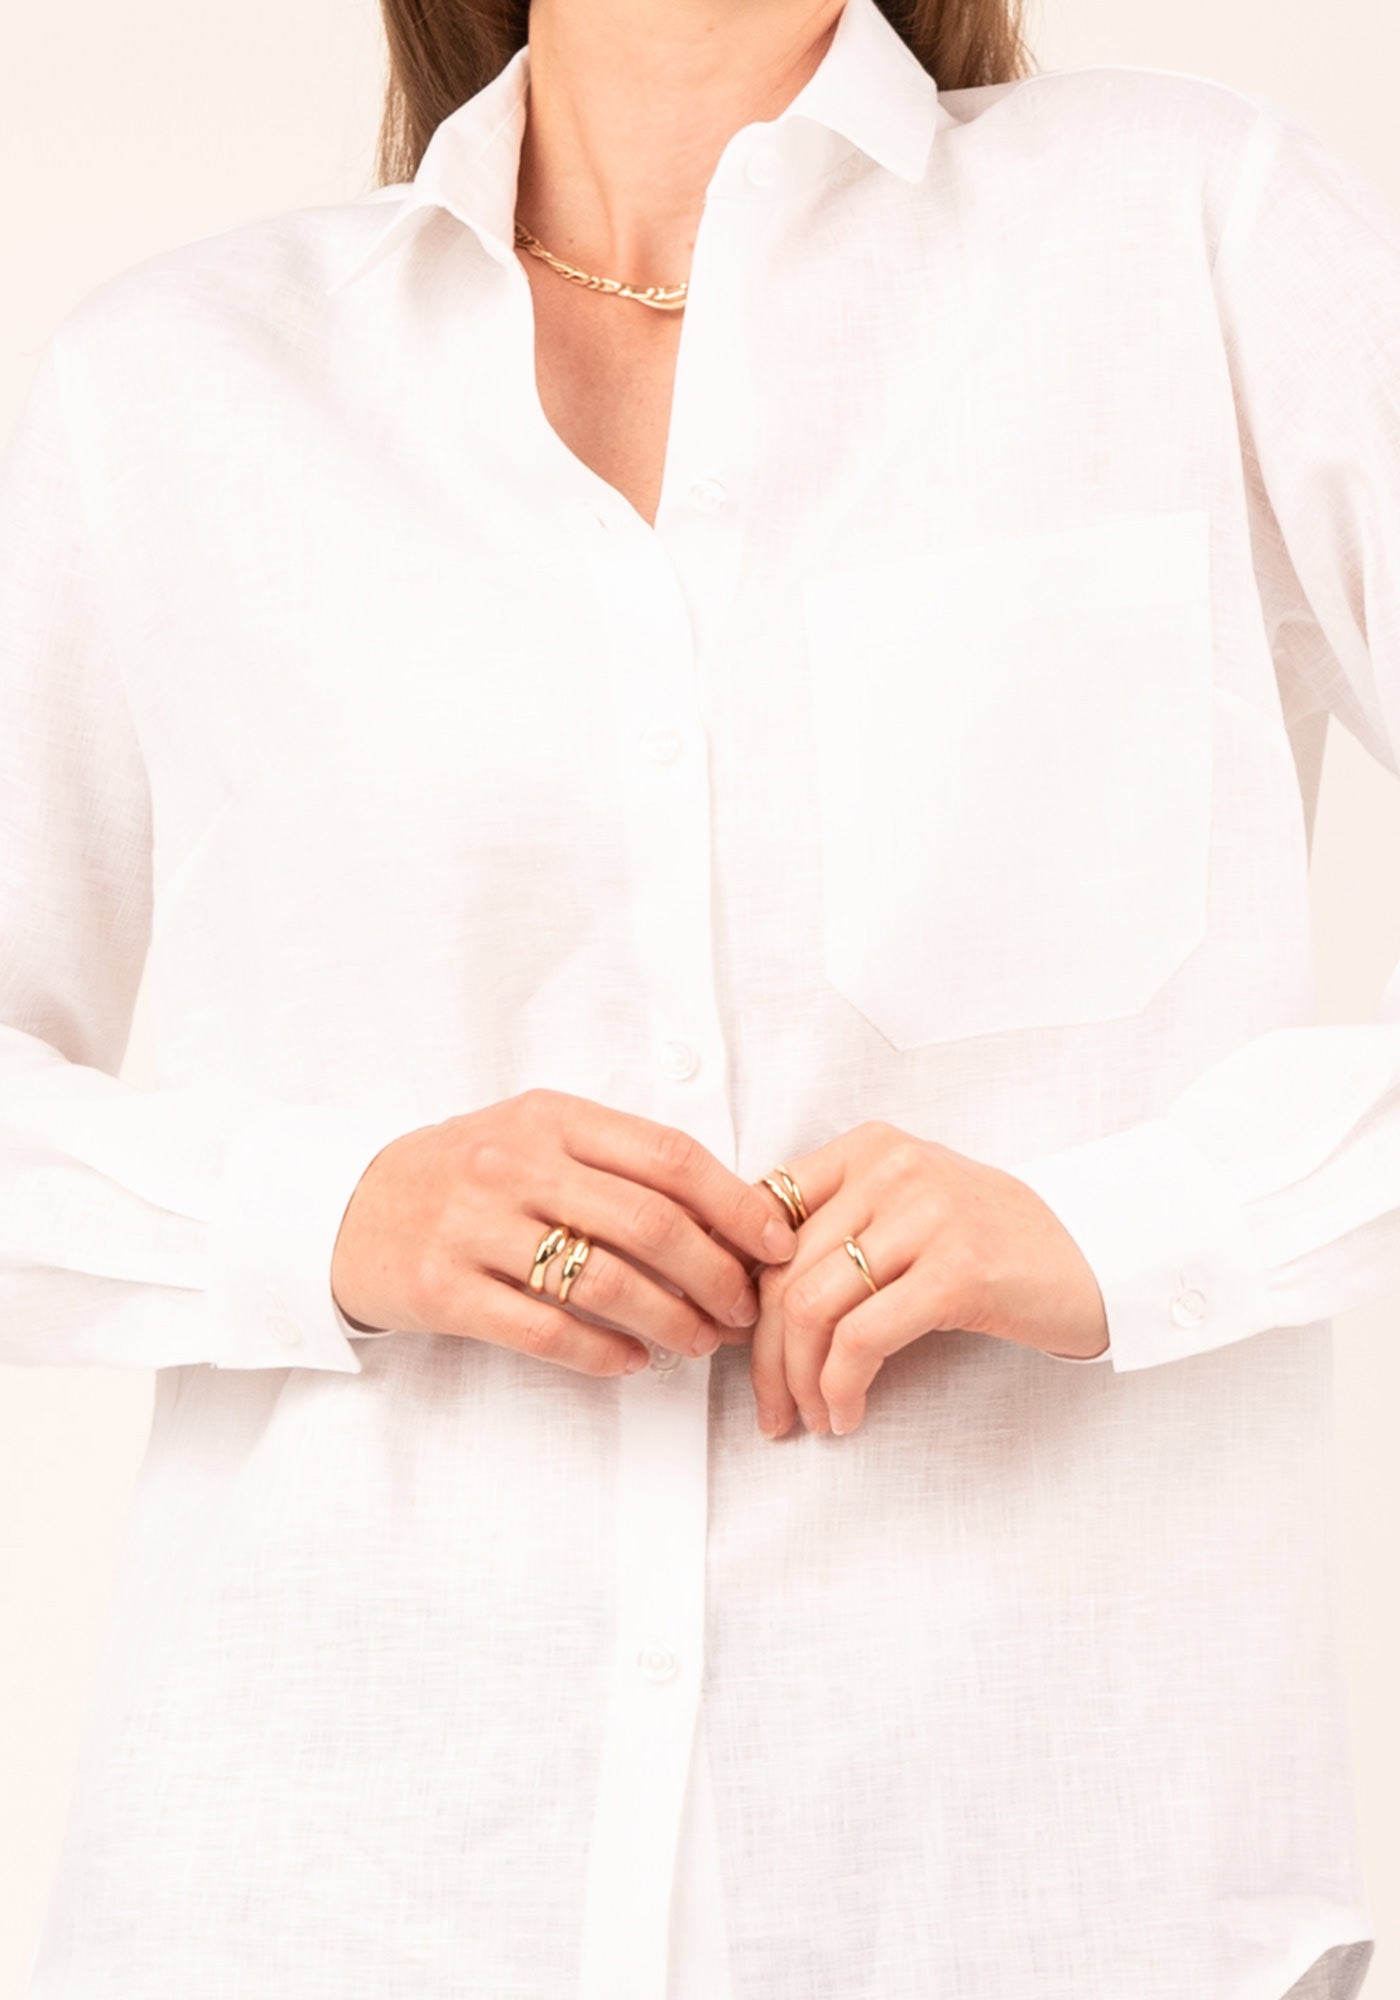 Women's Relaxed fit Linen Shirt in White